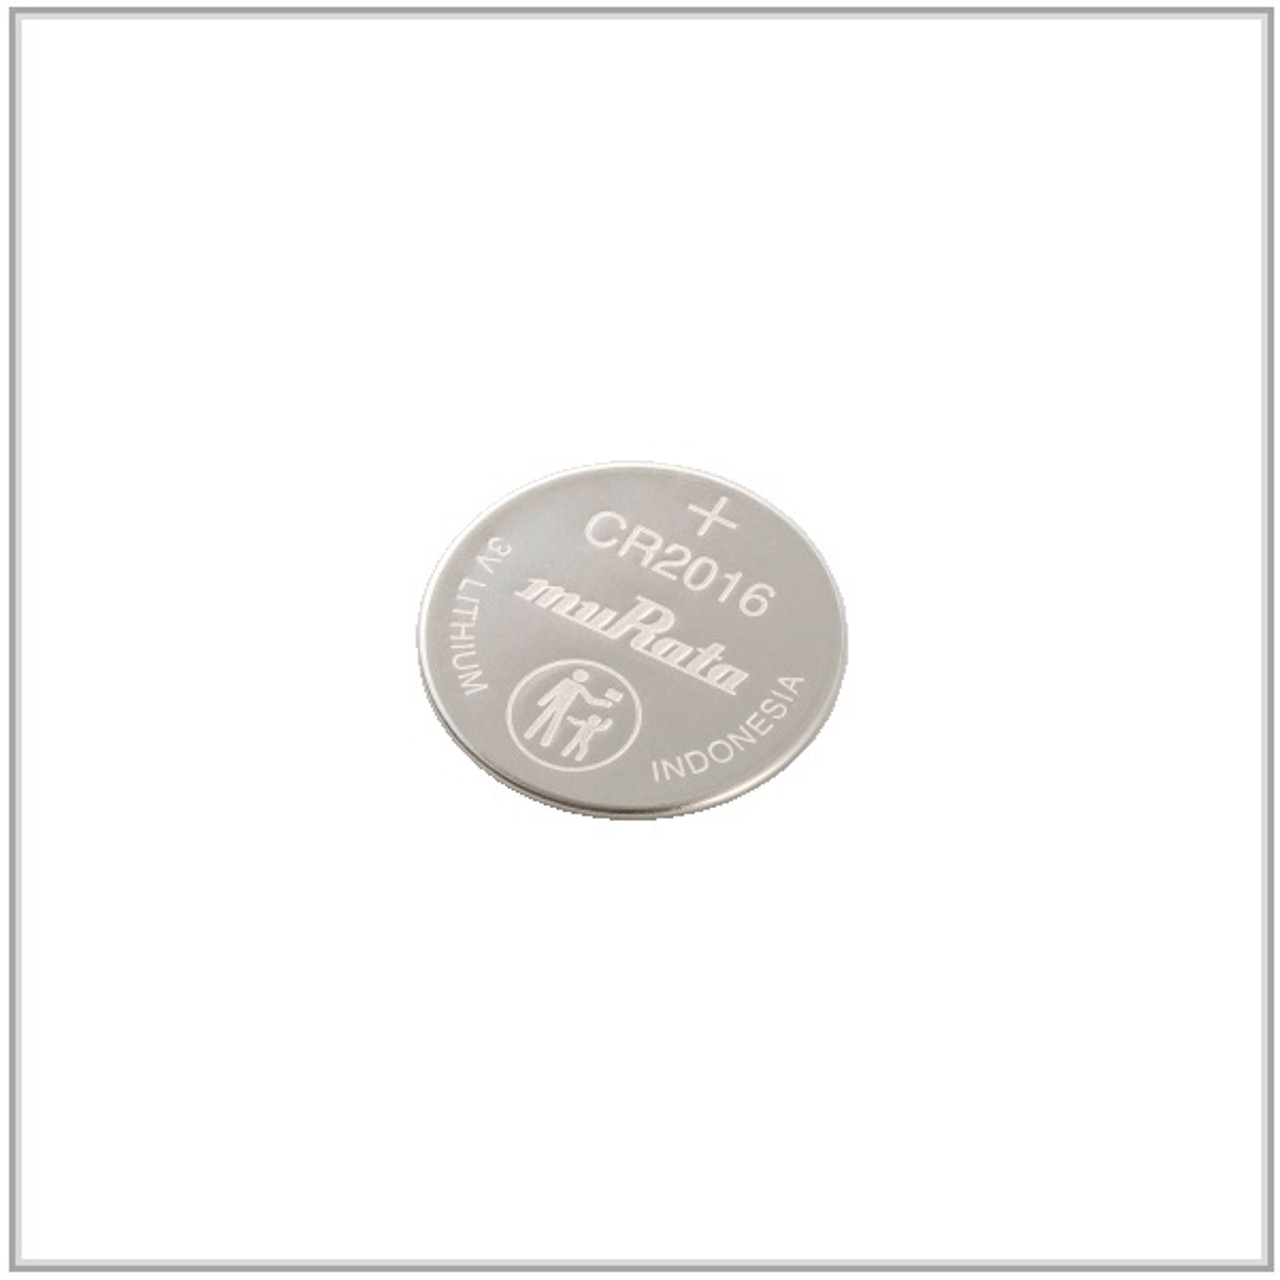 Murata CR2430 280mAh 3V Lithium (LiMnO2) Coin Cell Watch Battery - 1 Piece  Tear Strip, Sold Individually